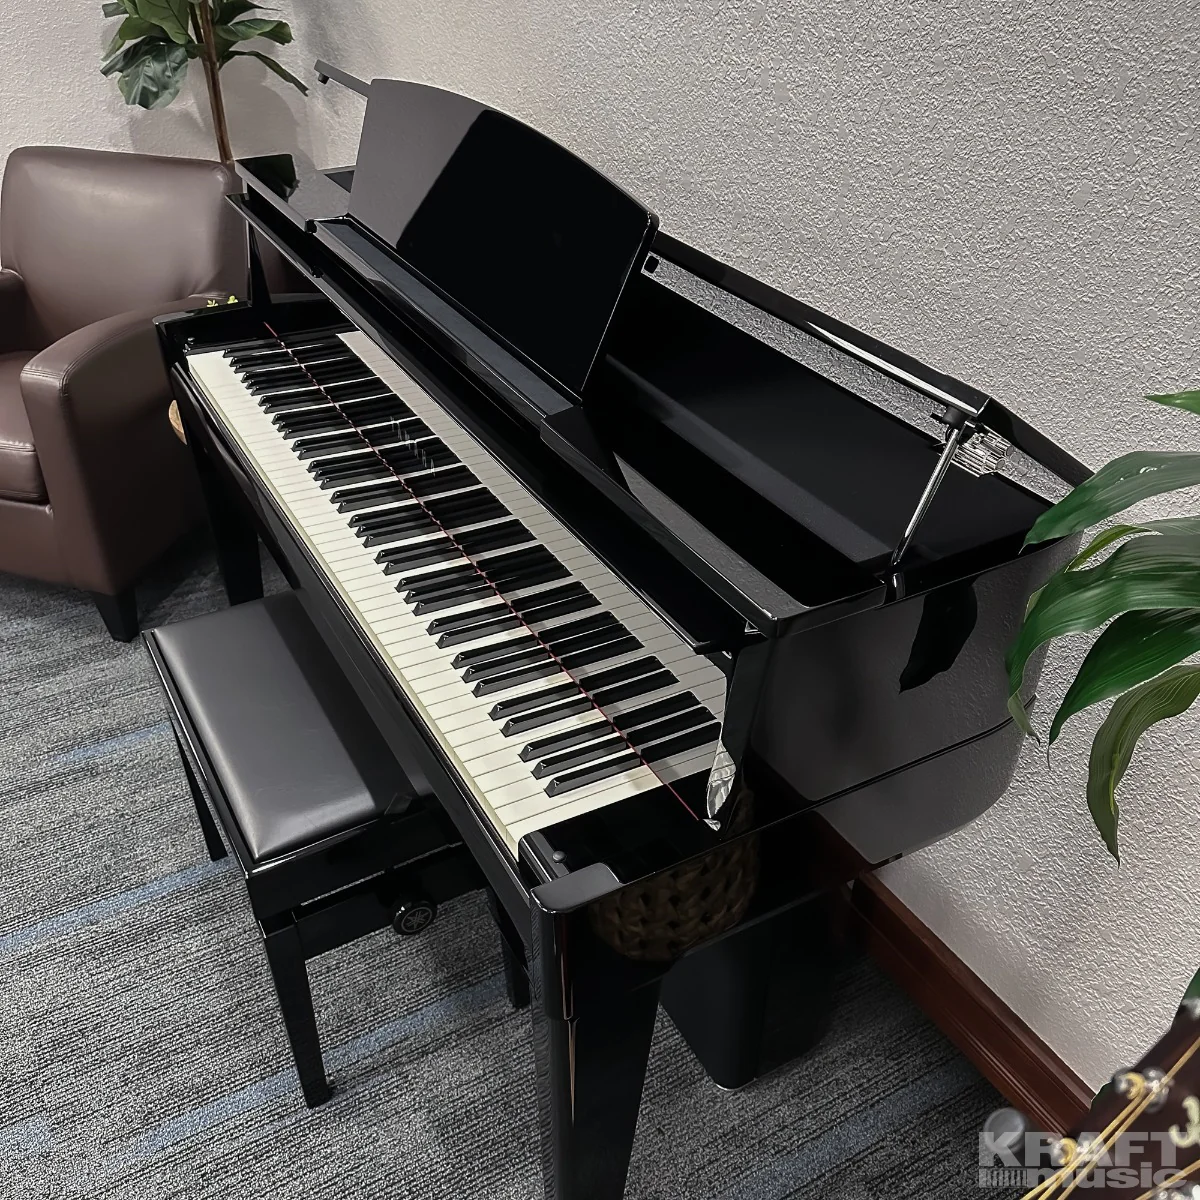 
Yamaha T121 Piano: Features, Reviews and Price Comparison